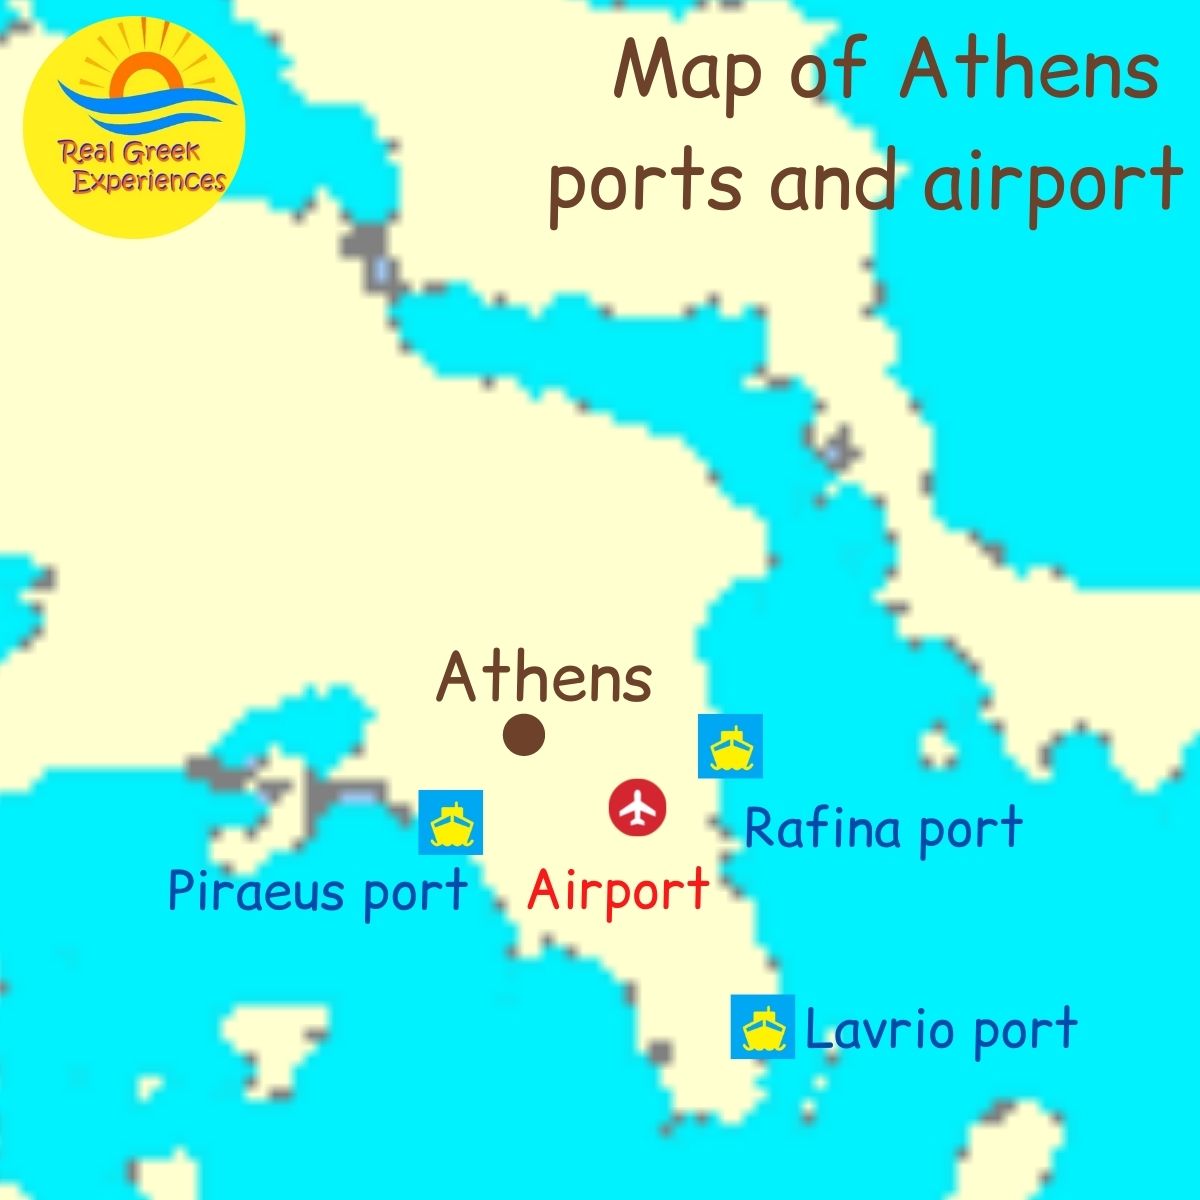 A map of Athens ports and airport